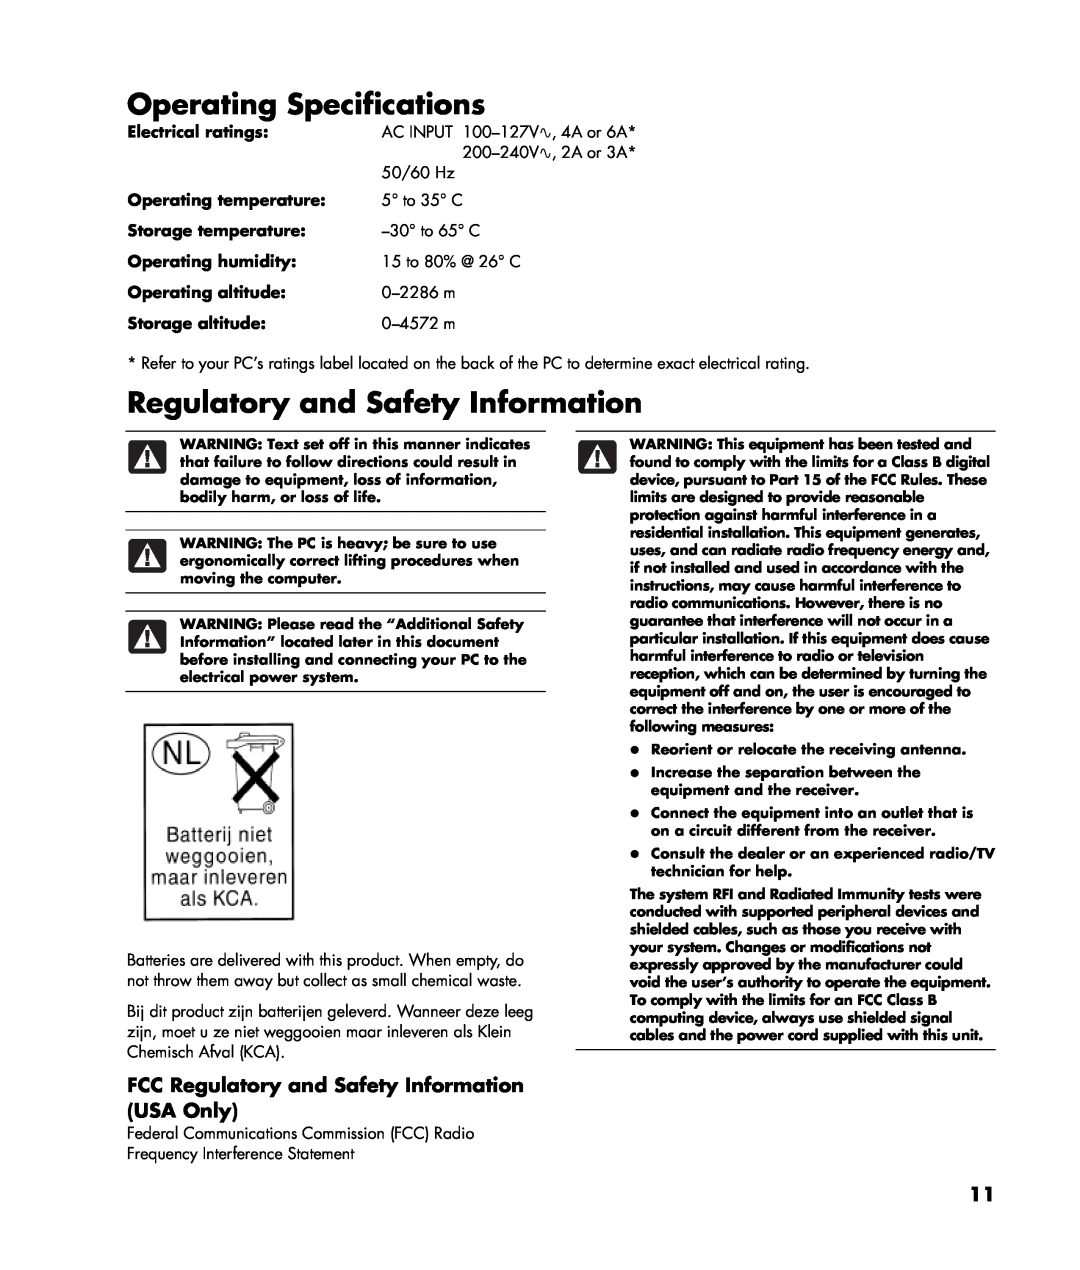 Compaq MIL-L100S Operating Specifications, Regulatory and Safety Information, Electrical ratings, Operating temperature 